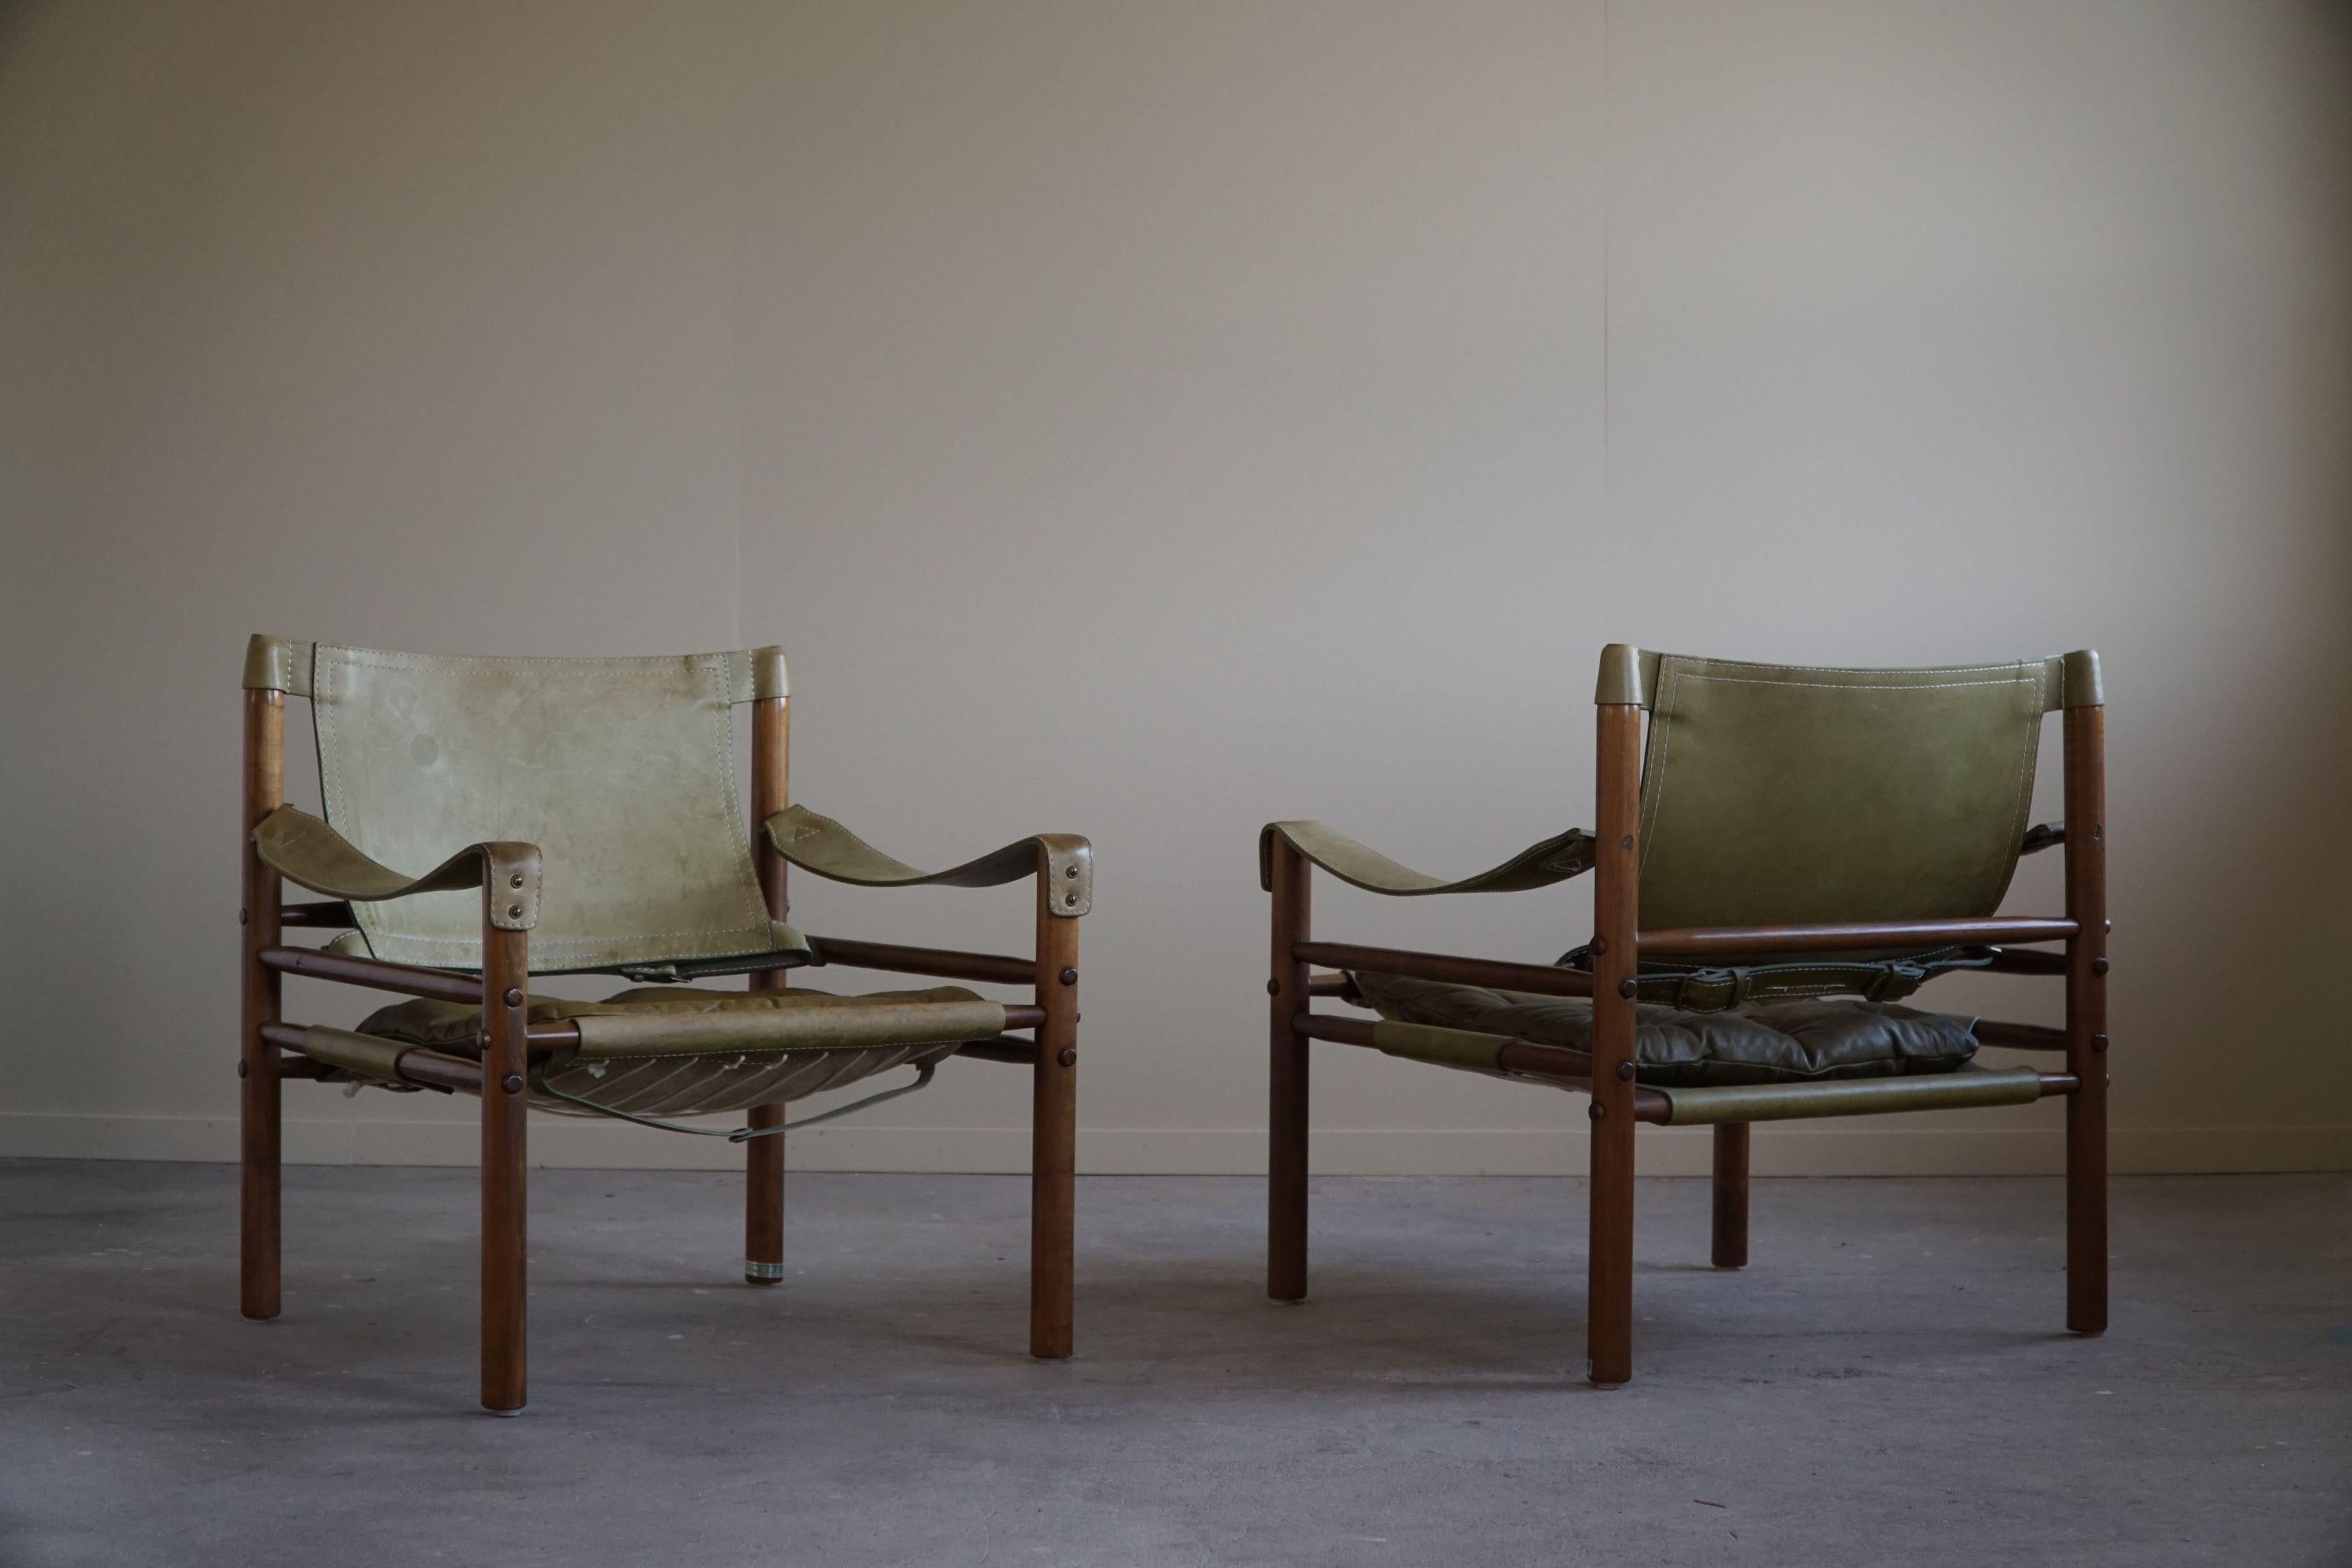 Pair of Sirocco Safari Chairs, Made by Arne Norell AB in Aneby, Sweden, 1960s 7